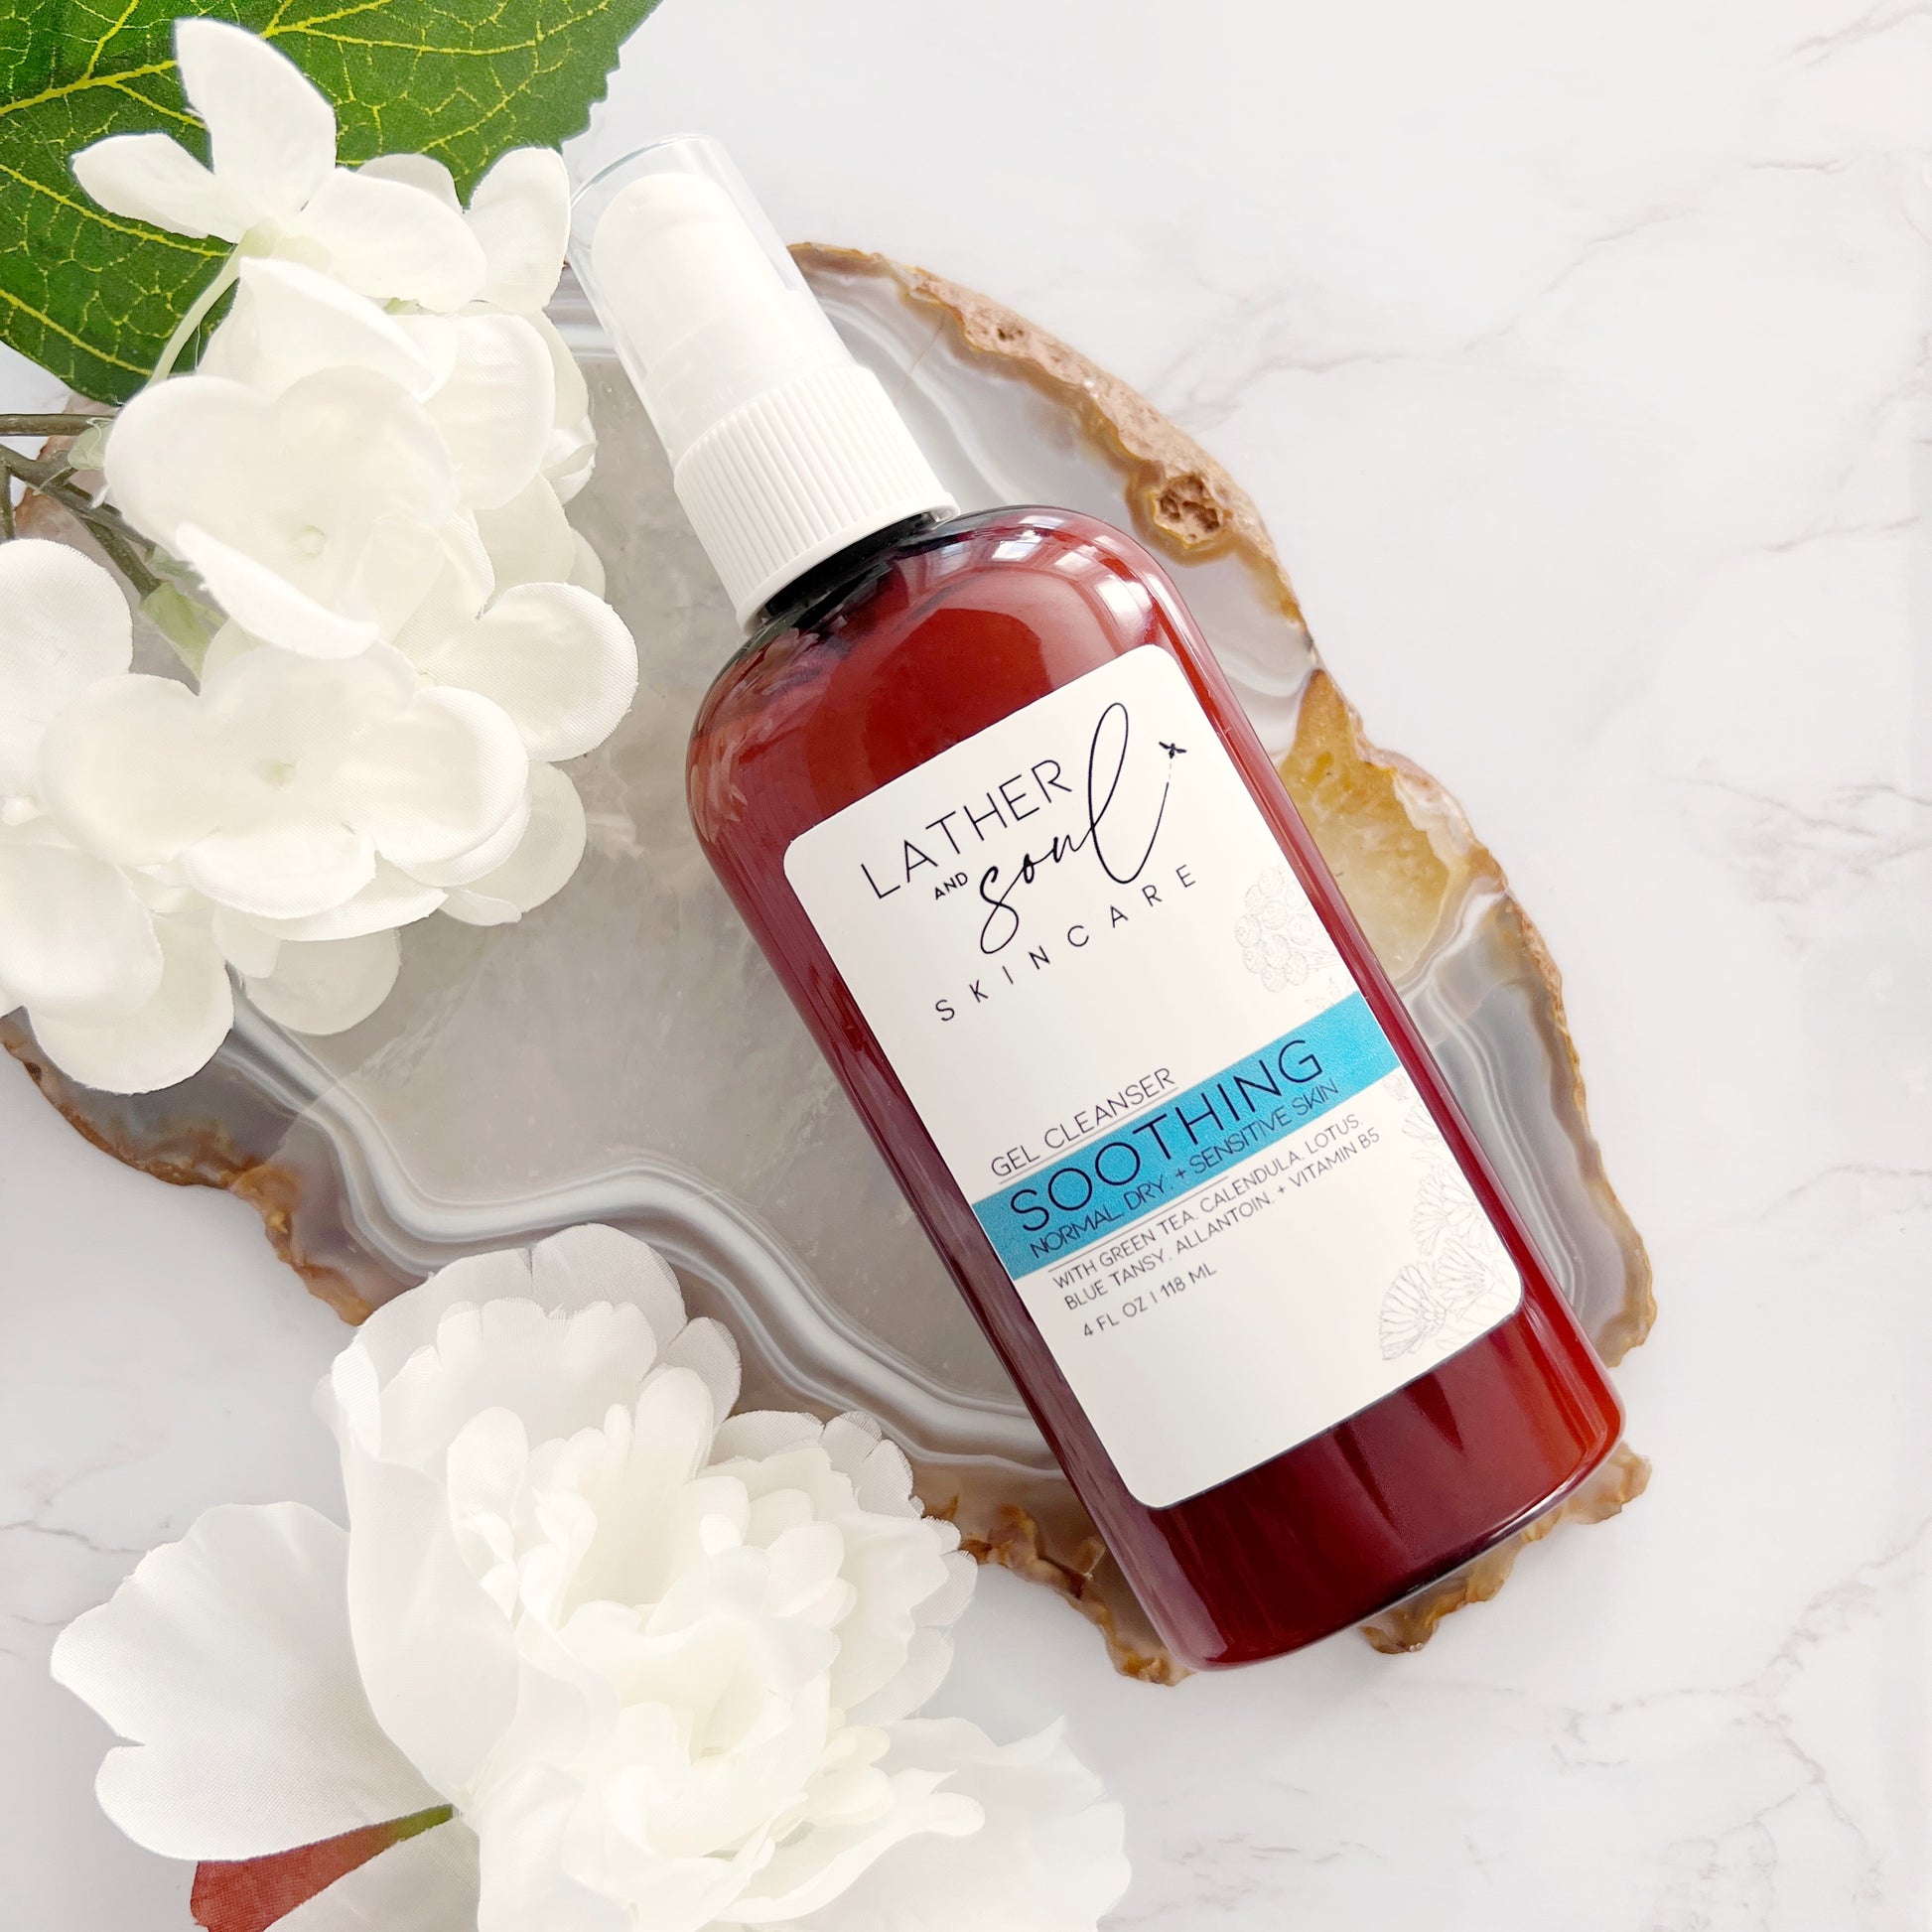 Gentle cream cleanser from Lather and Soul Skincare